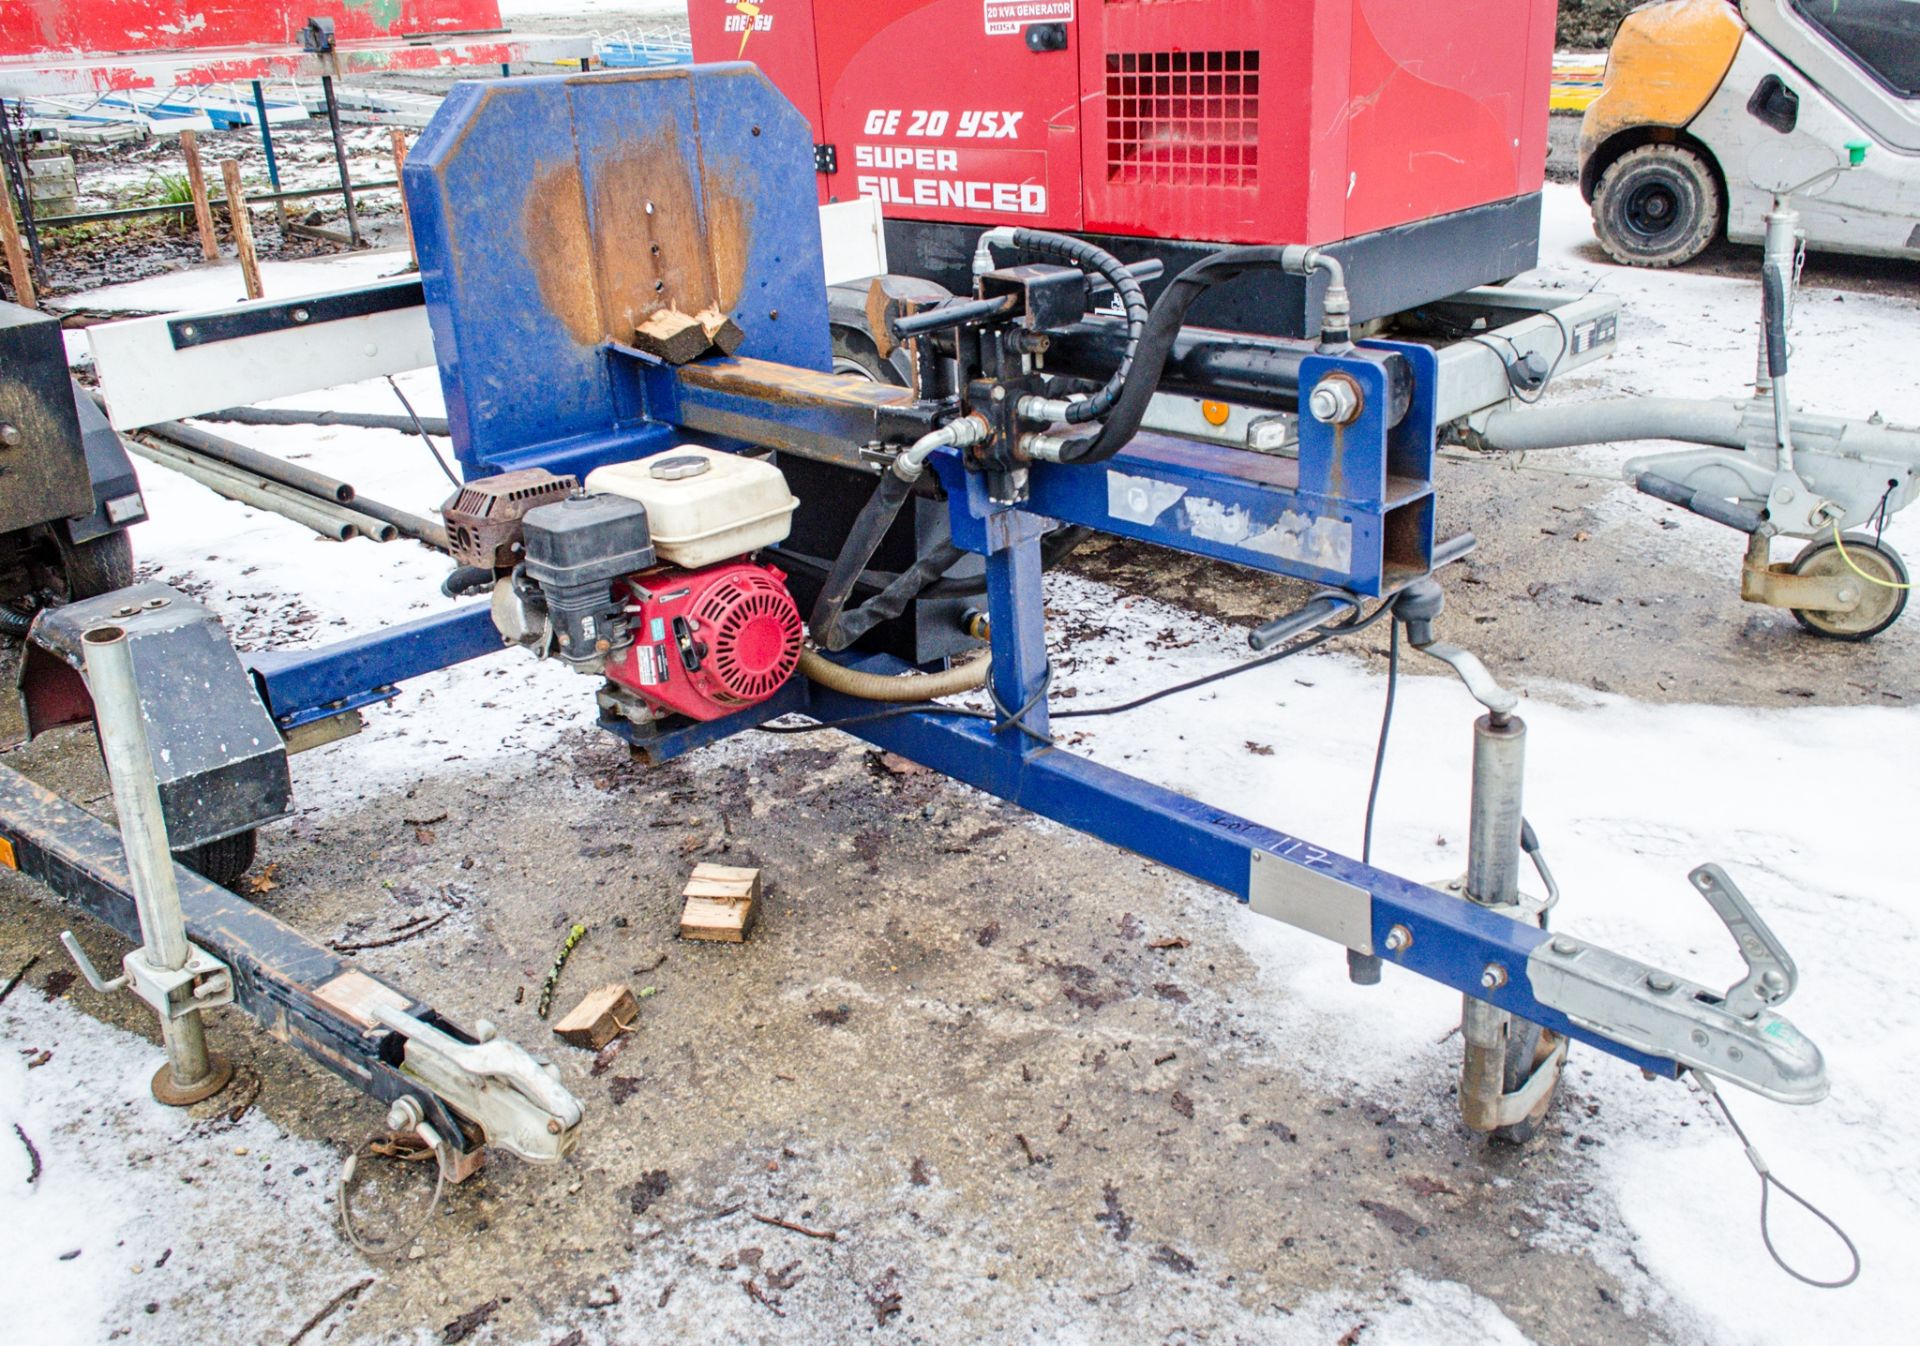 Oxdale petrol driven fast tow log splitter HS18475